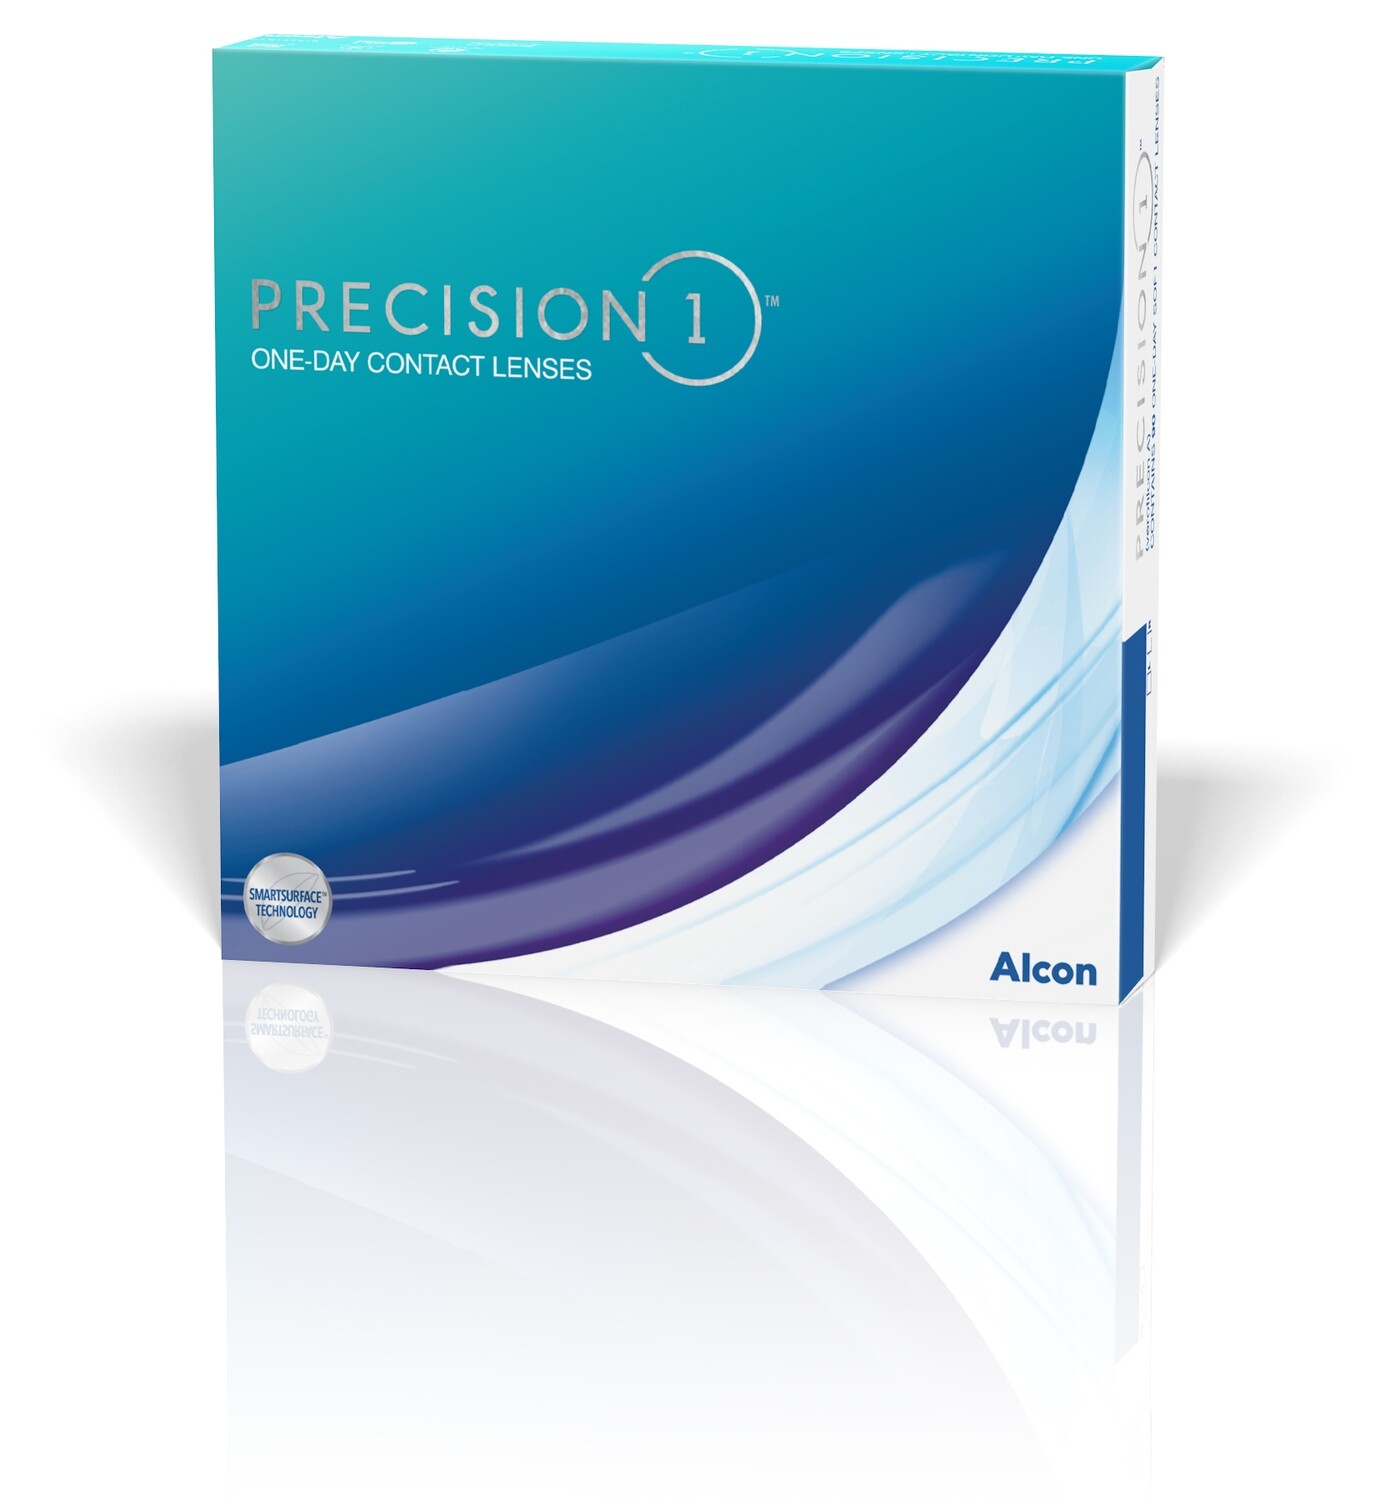 Best Deal of the Year on Precision1 Contact Lenses!